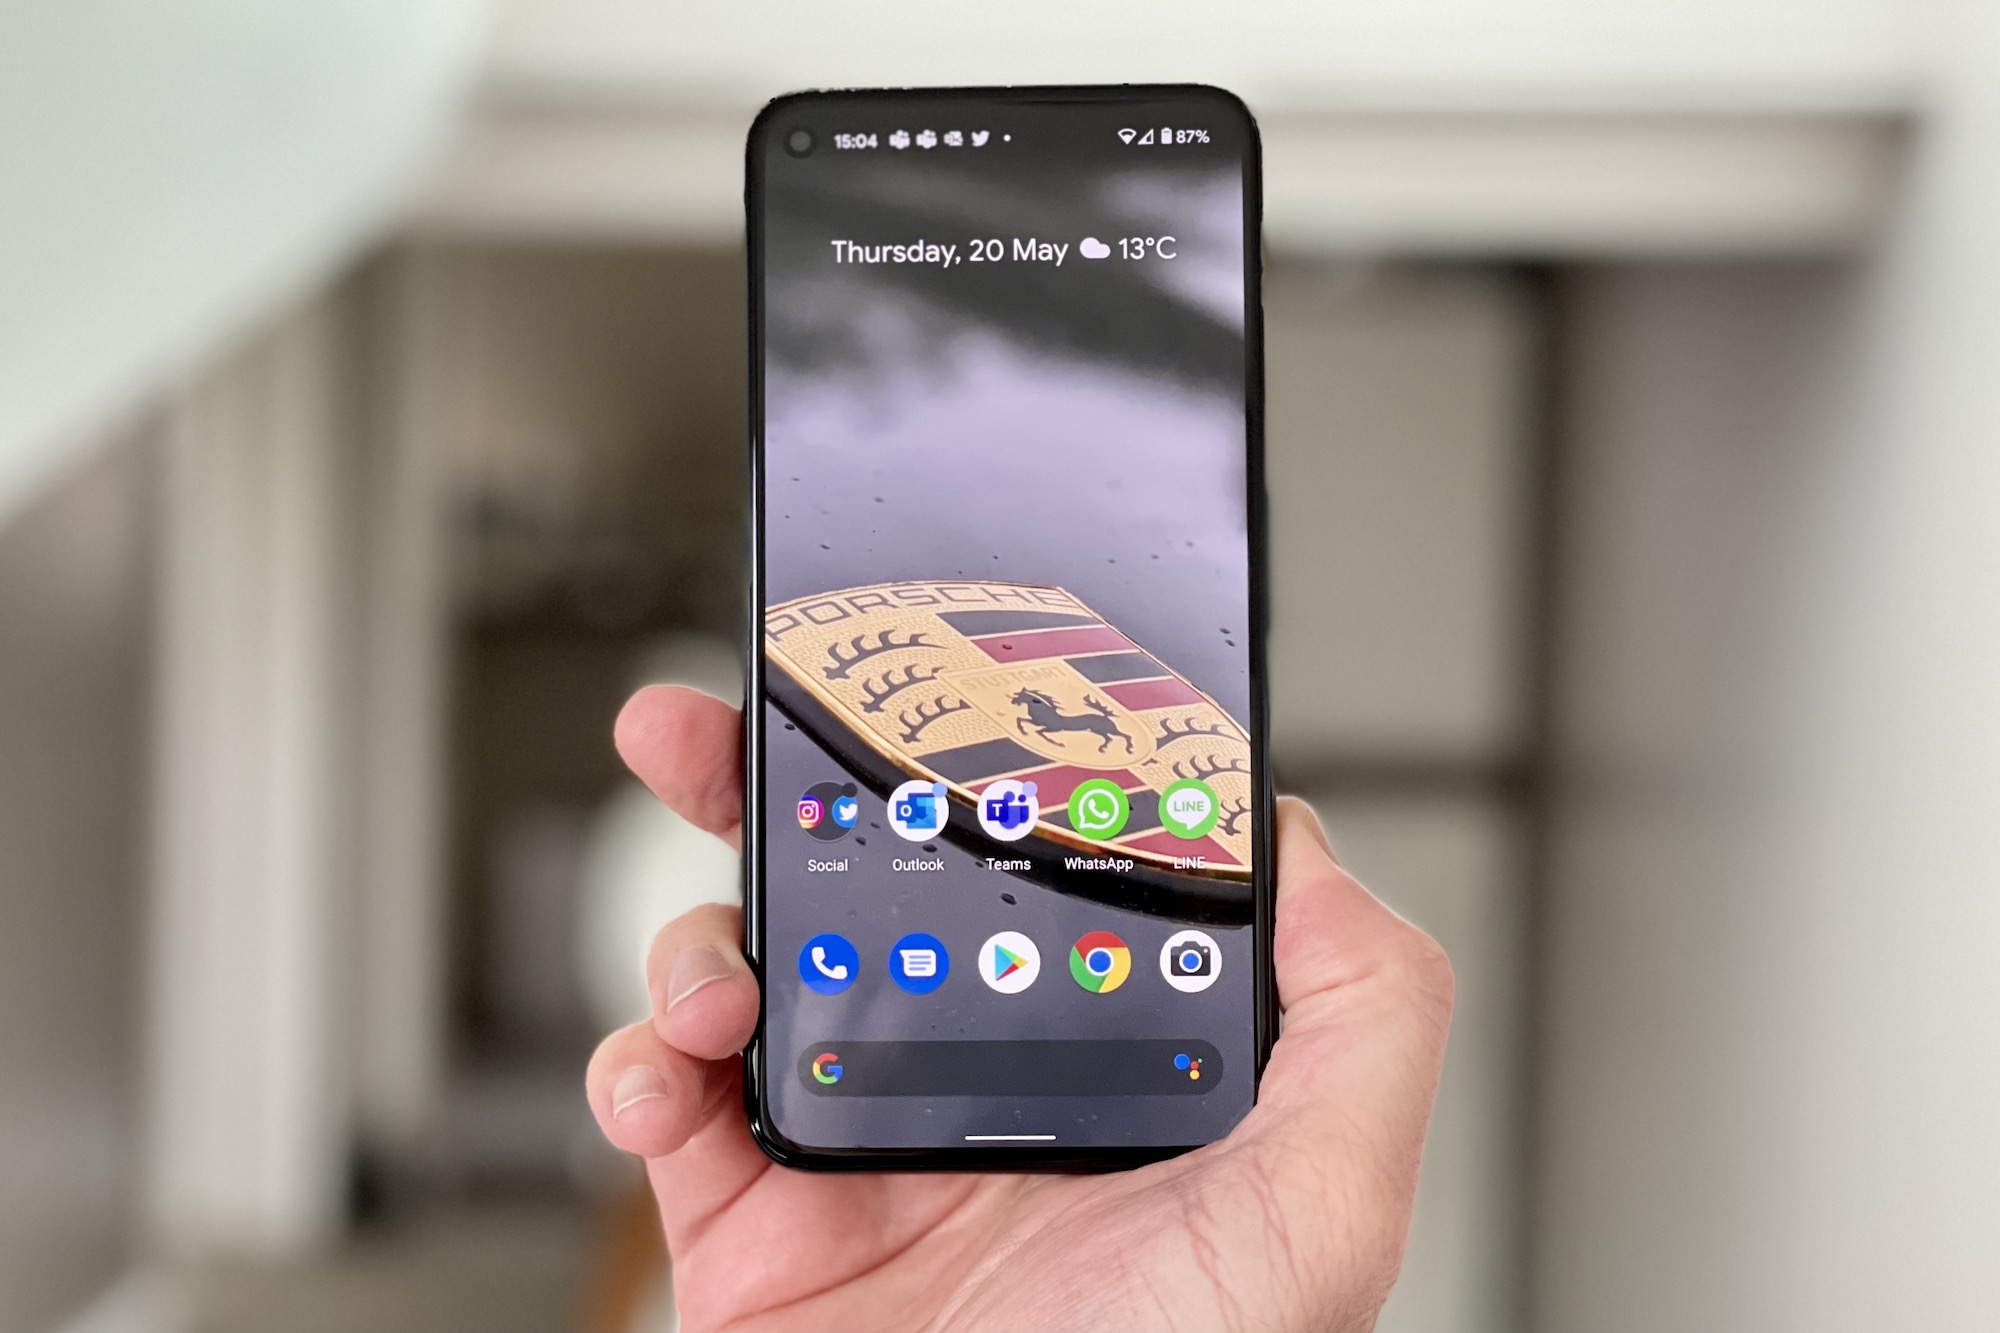 Google Pixel 5 review: an affordable flagship with some